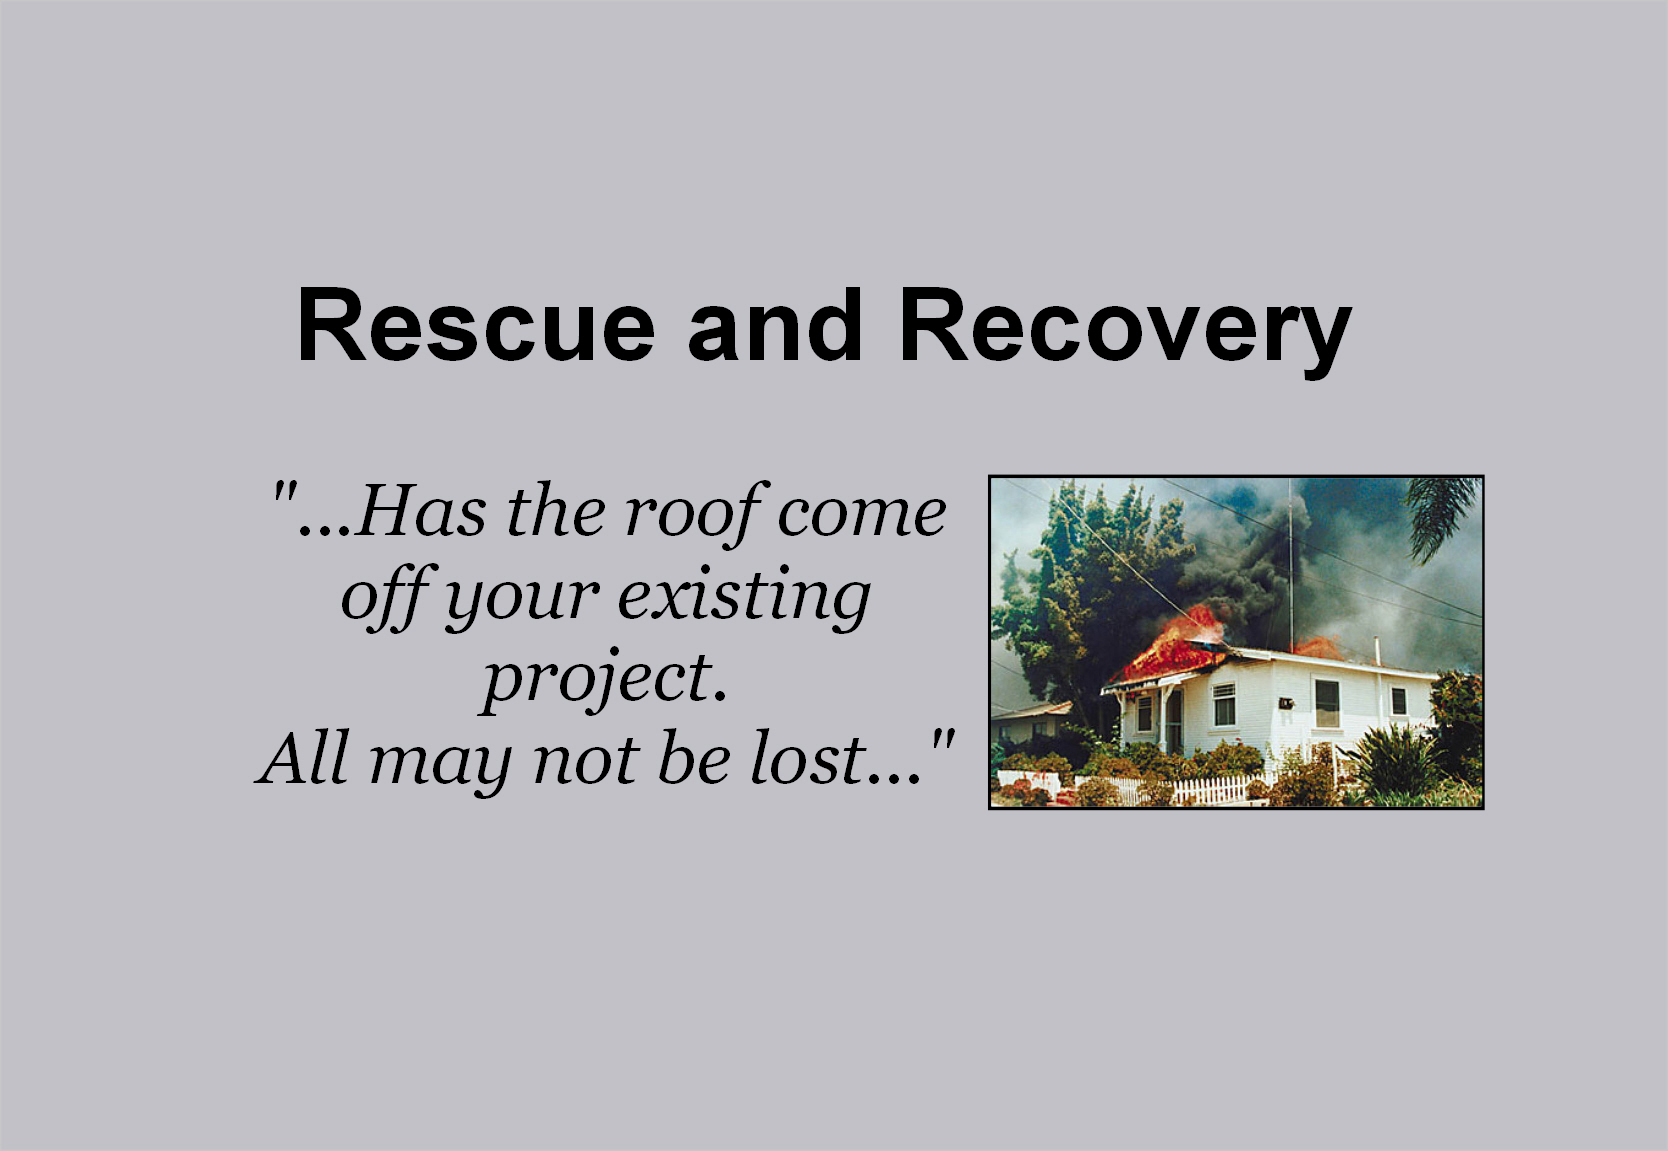 Rescue and Recovery